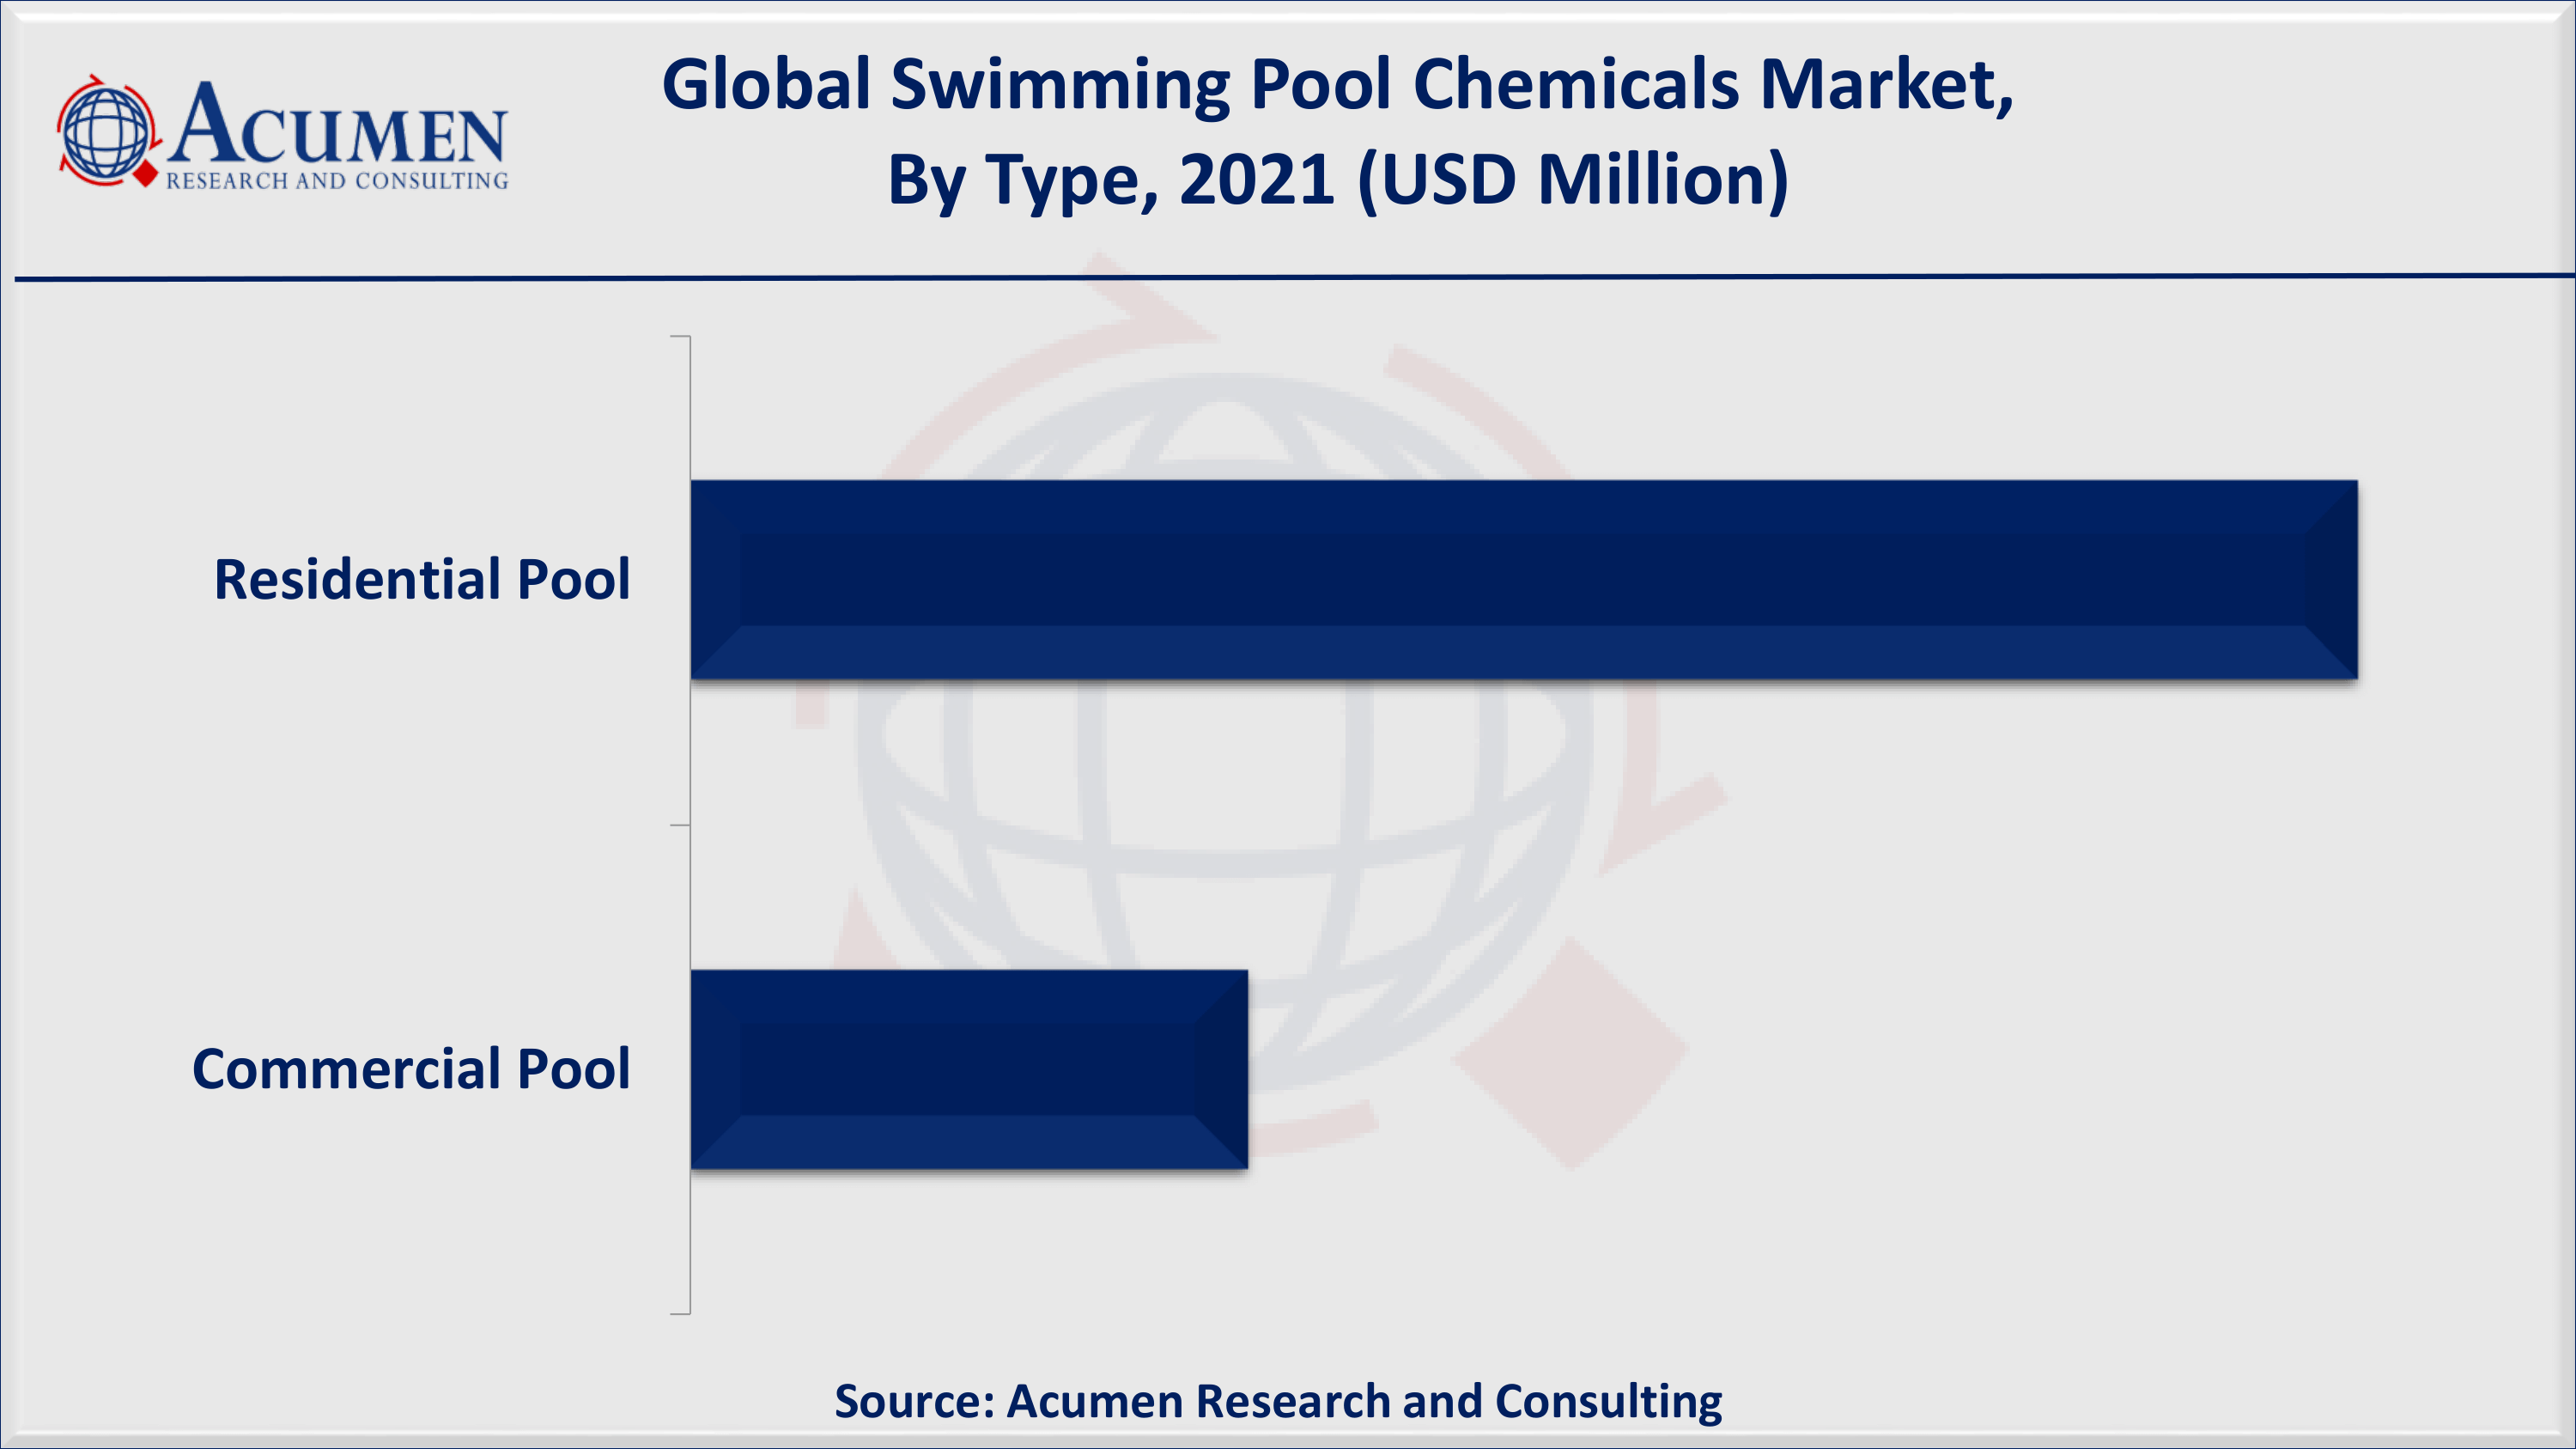 Based on type, chlorine covered for over 40% of the overall market share in 2021